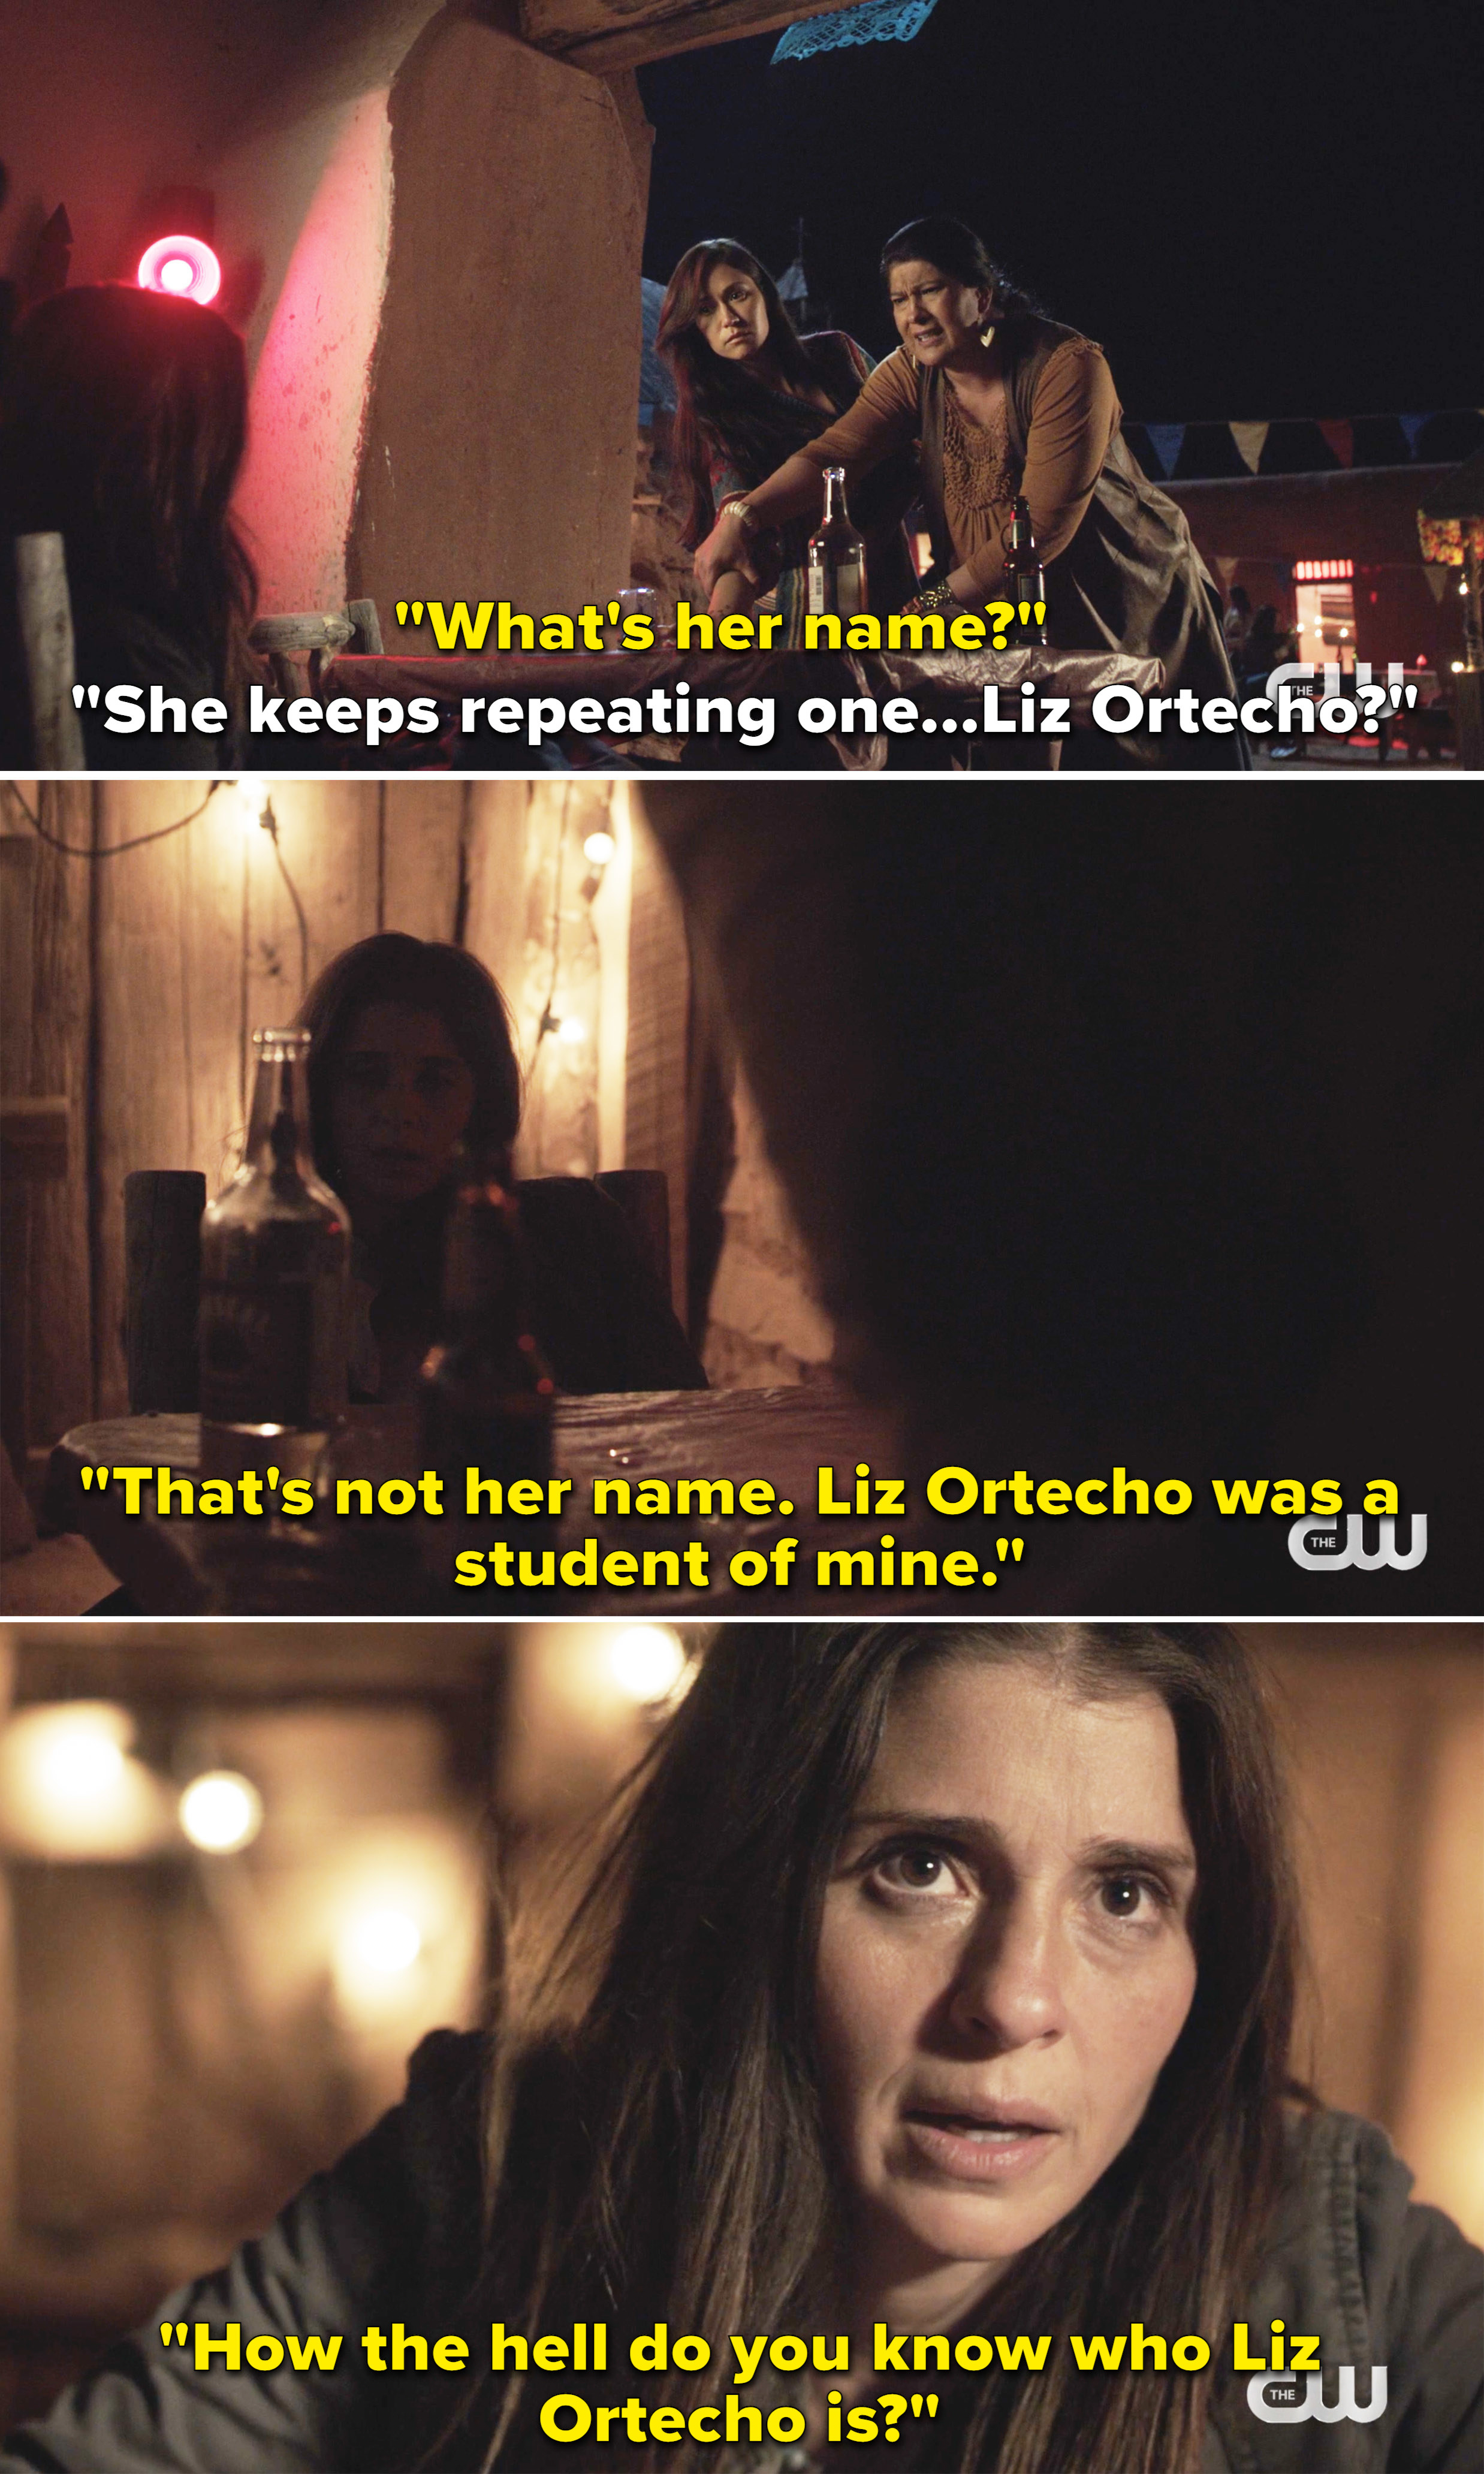 Allie saying, &quot;Liz Ortecho was a student of mine. How the hell do you know who Liz Ortecho is?&quot;